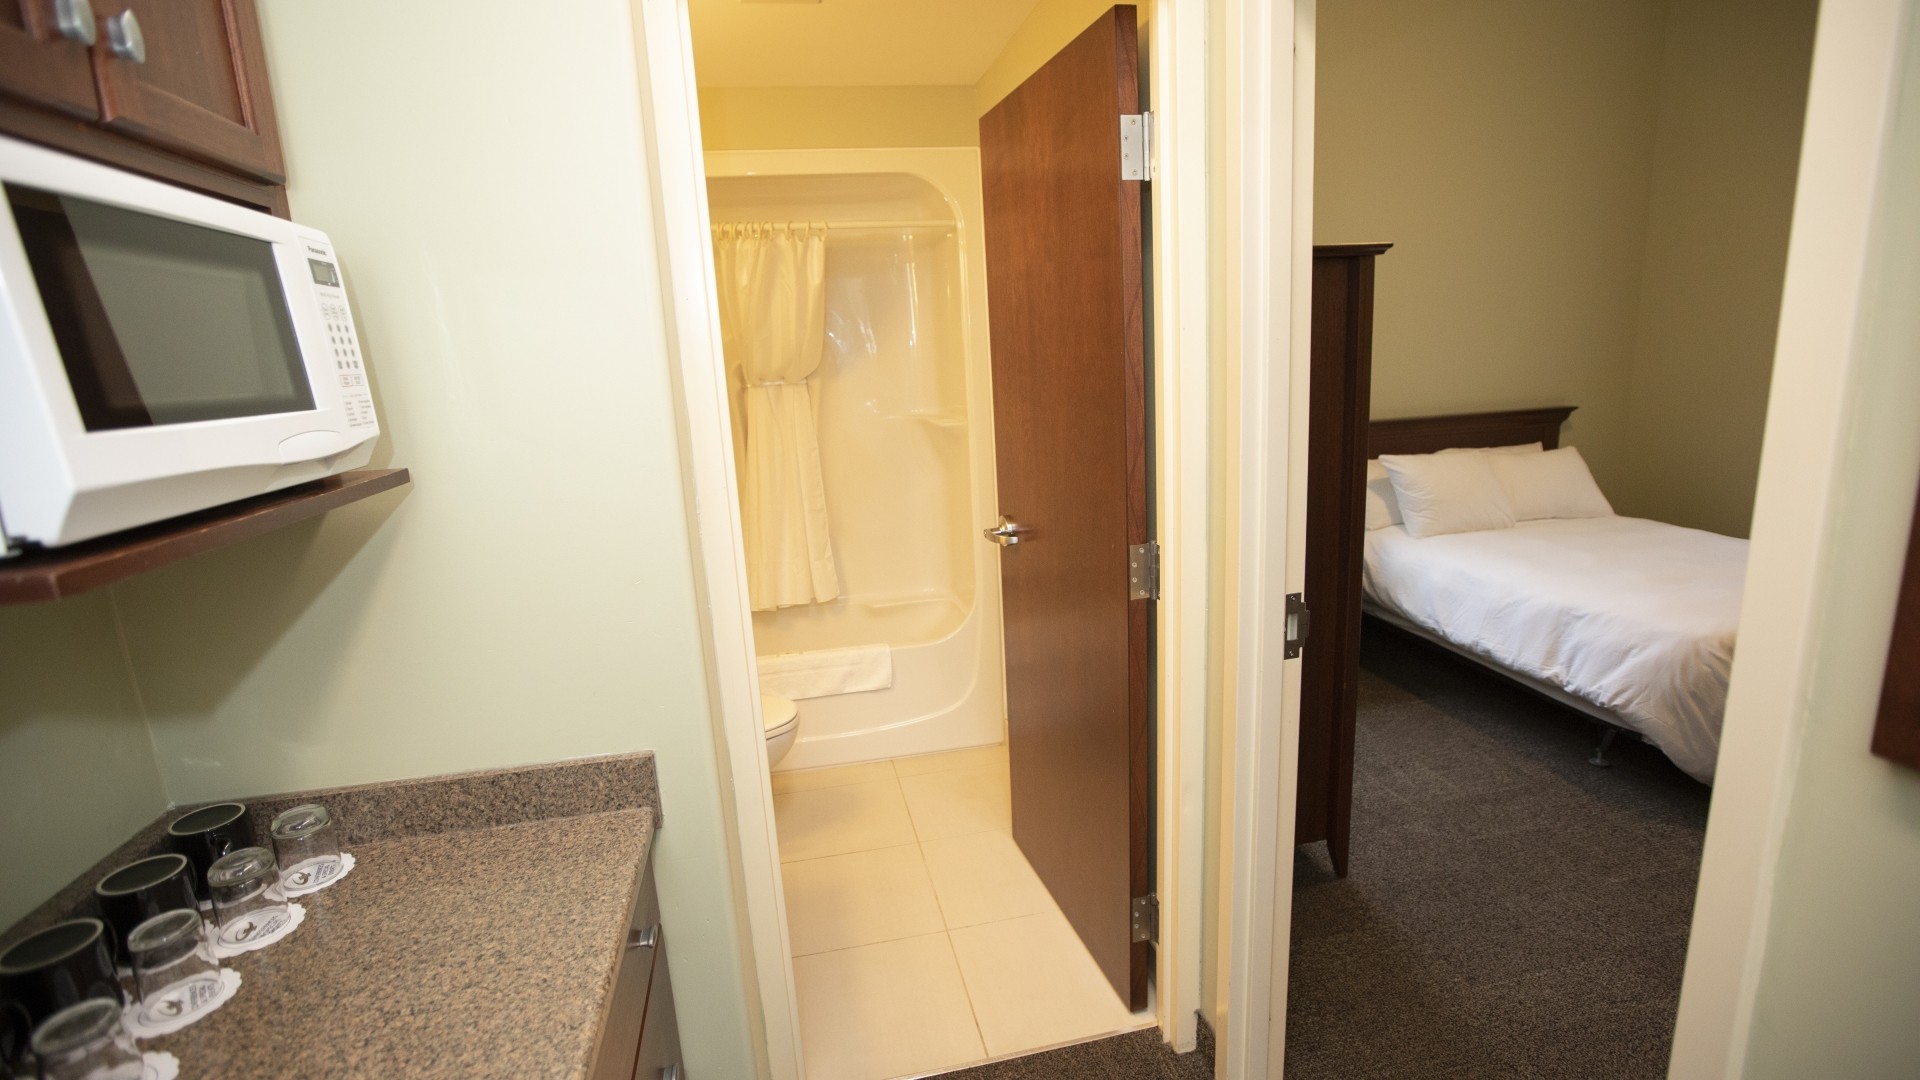 Governors Hall double suite with a bathroom, microwave and one of the two double beds.  